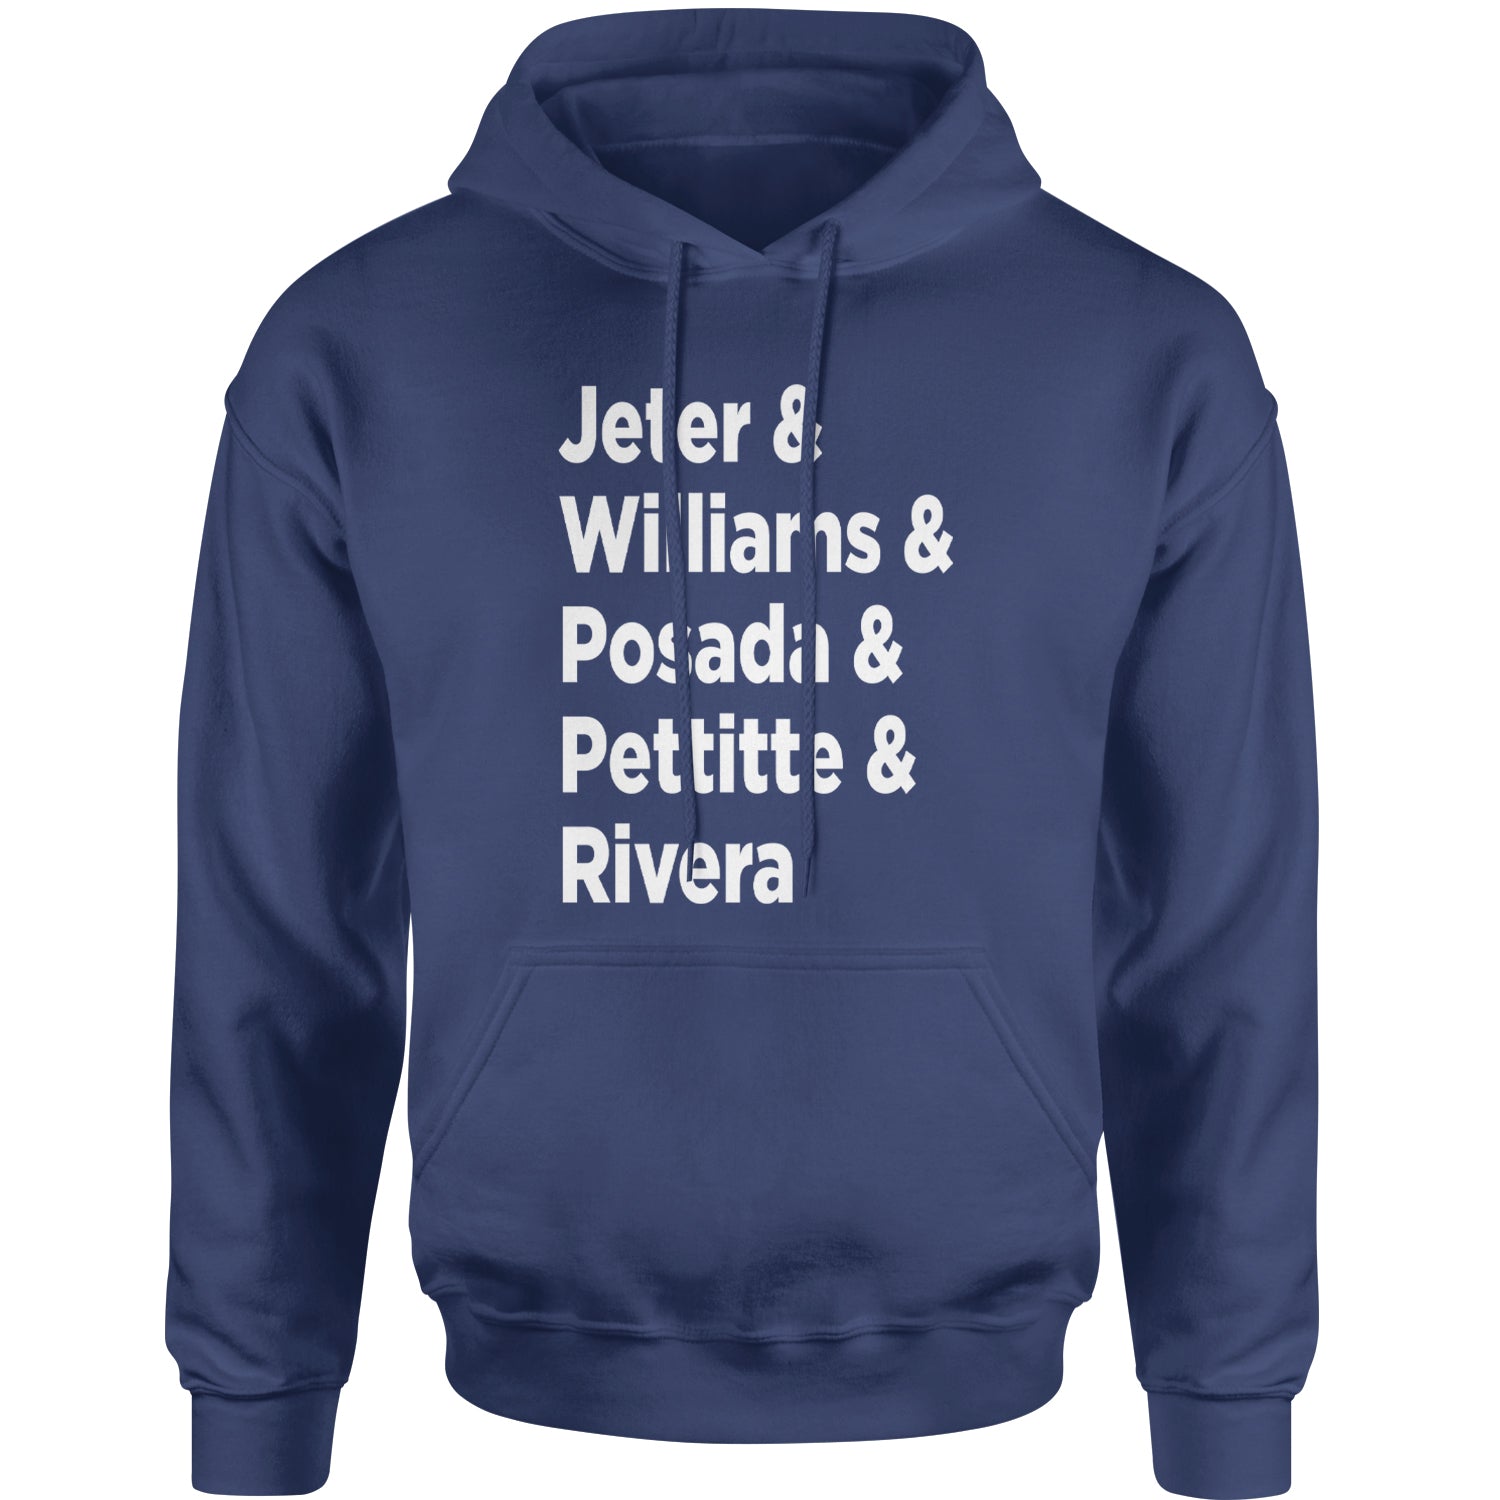 Jeter and Williams and Posada and Pettitte and Rivera Adult Hoodie Sweatshirt baseball, comes, here, judge, the by Expression Tees